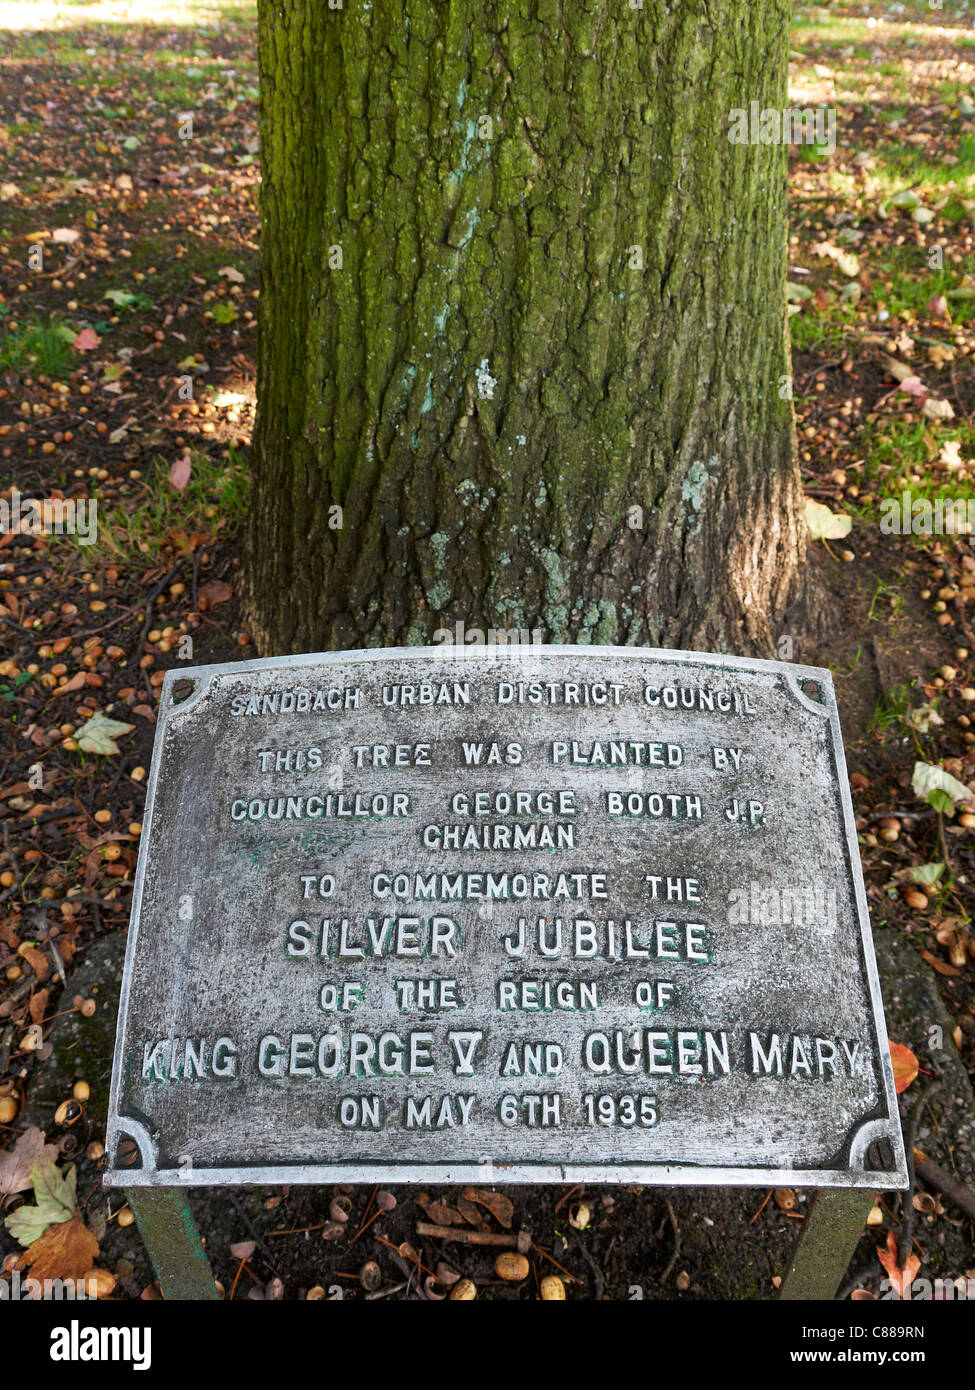 Sandbach park Cheshire plaque marking oak tree planted for King George and Queen Mary in 1935 by George Booth Stock Photo